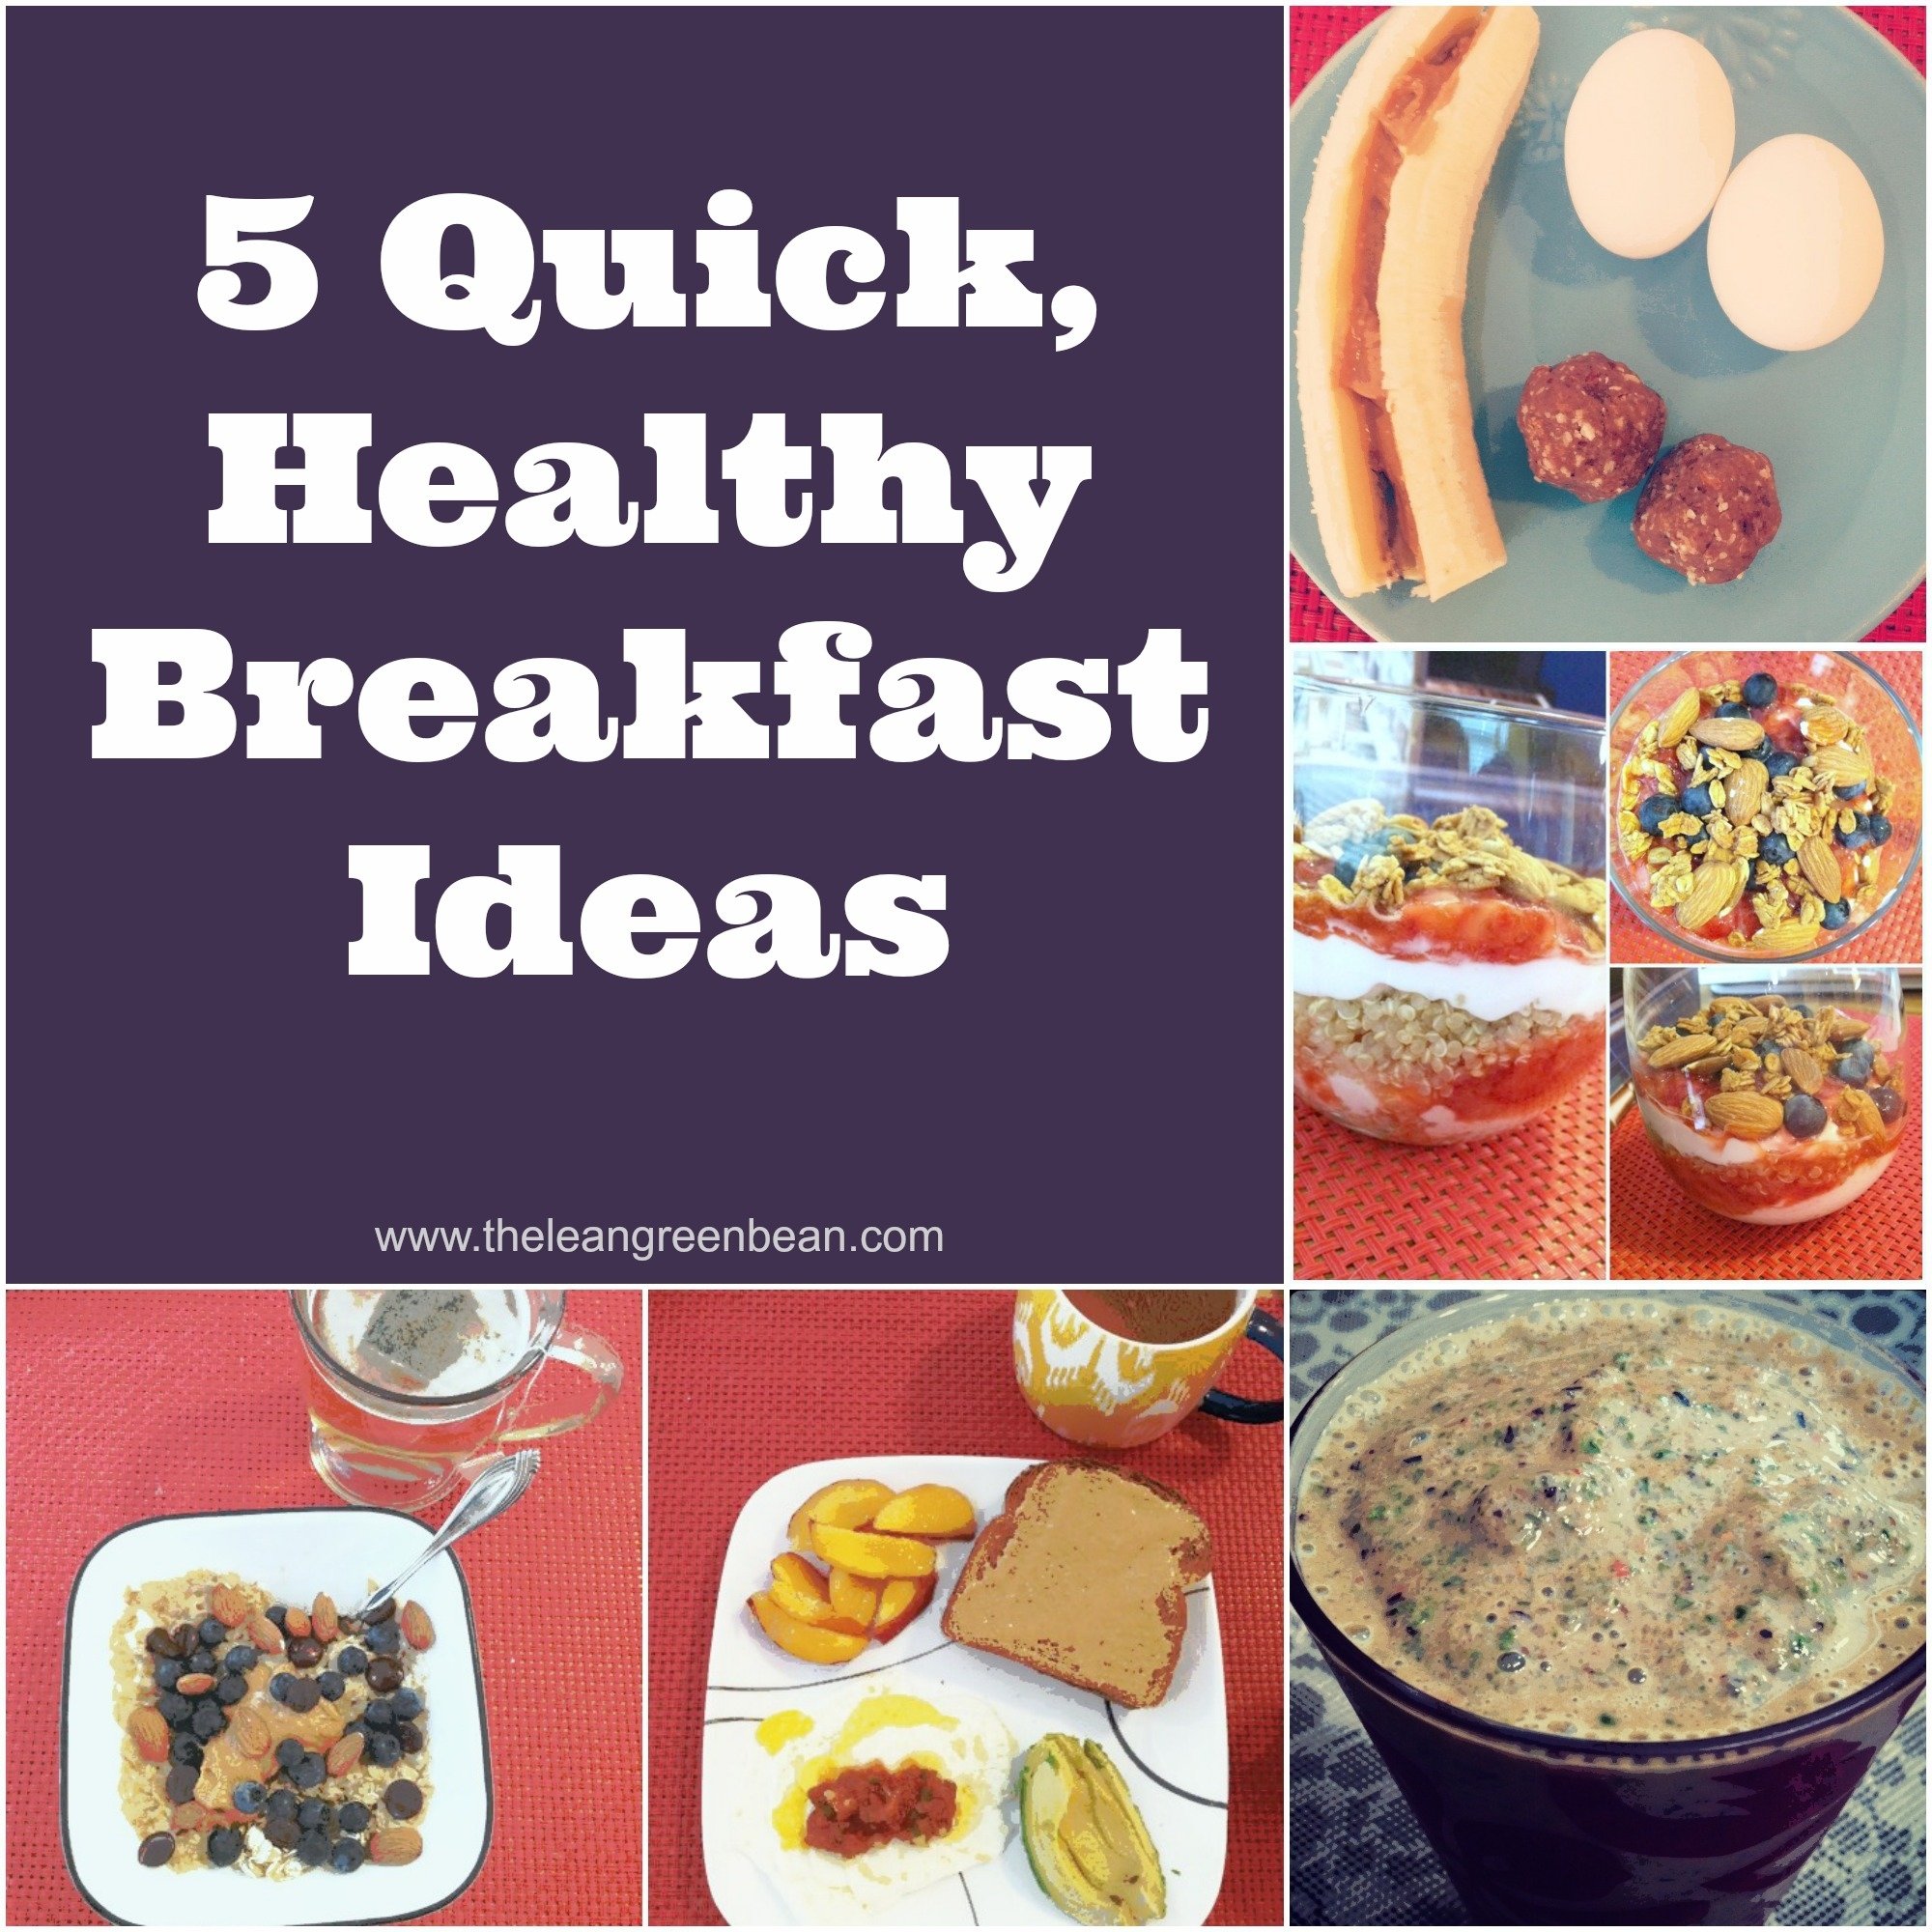 10 Awesome Quick Healthy Breakfast Ideas On The Go quick healthy breakfast ideas from a registered dietitian 1 2022